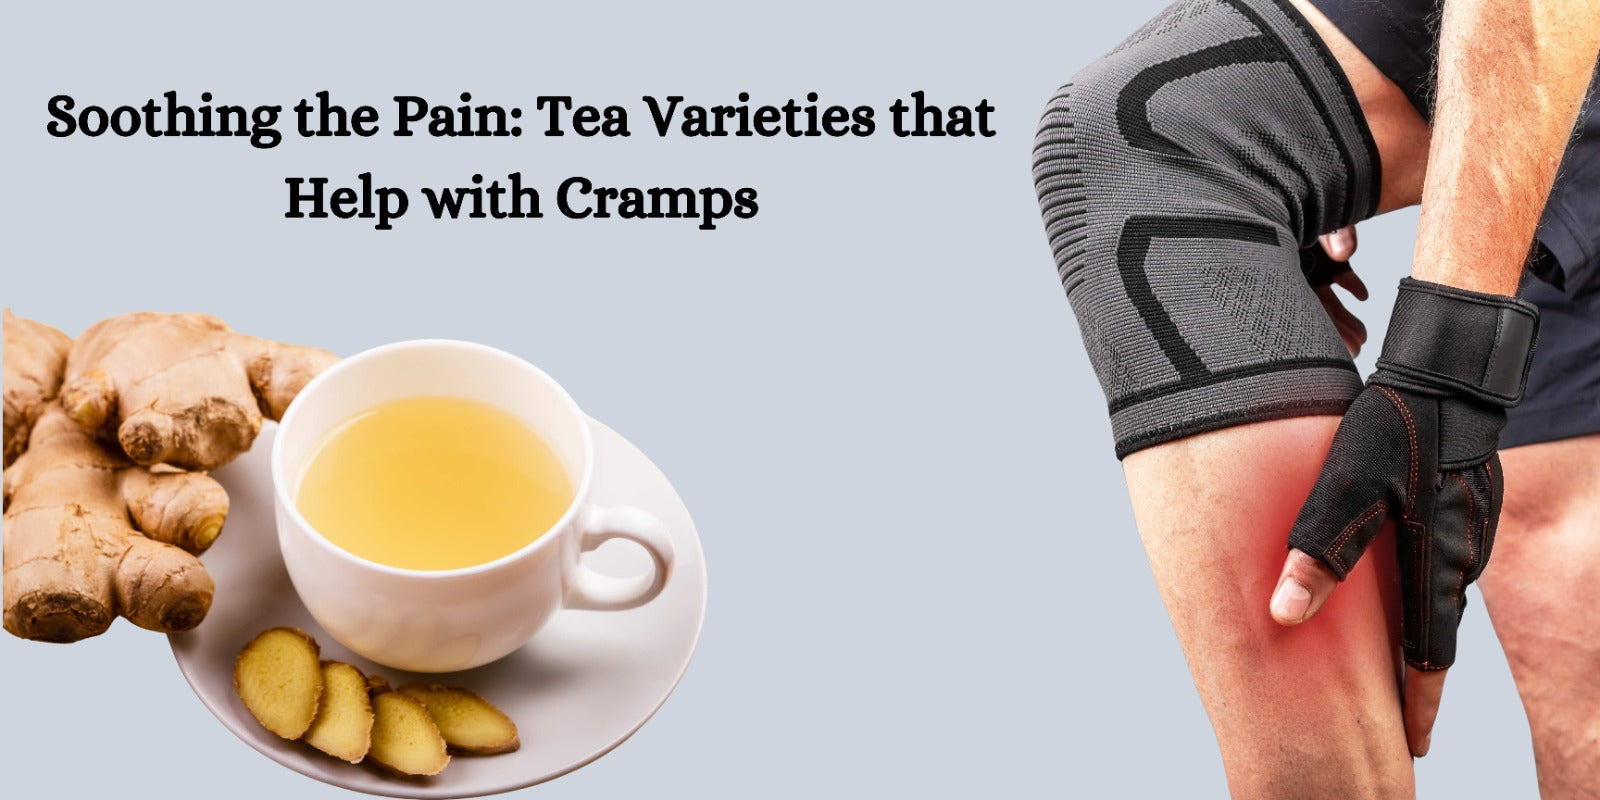 Soothing the Pain: Tea Varieties that Help with Cramps